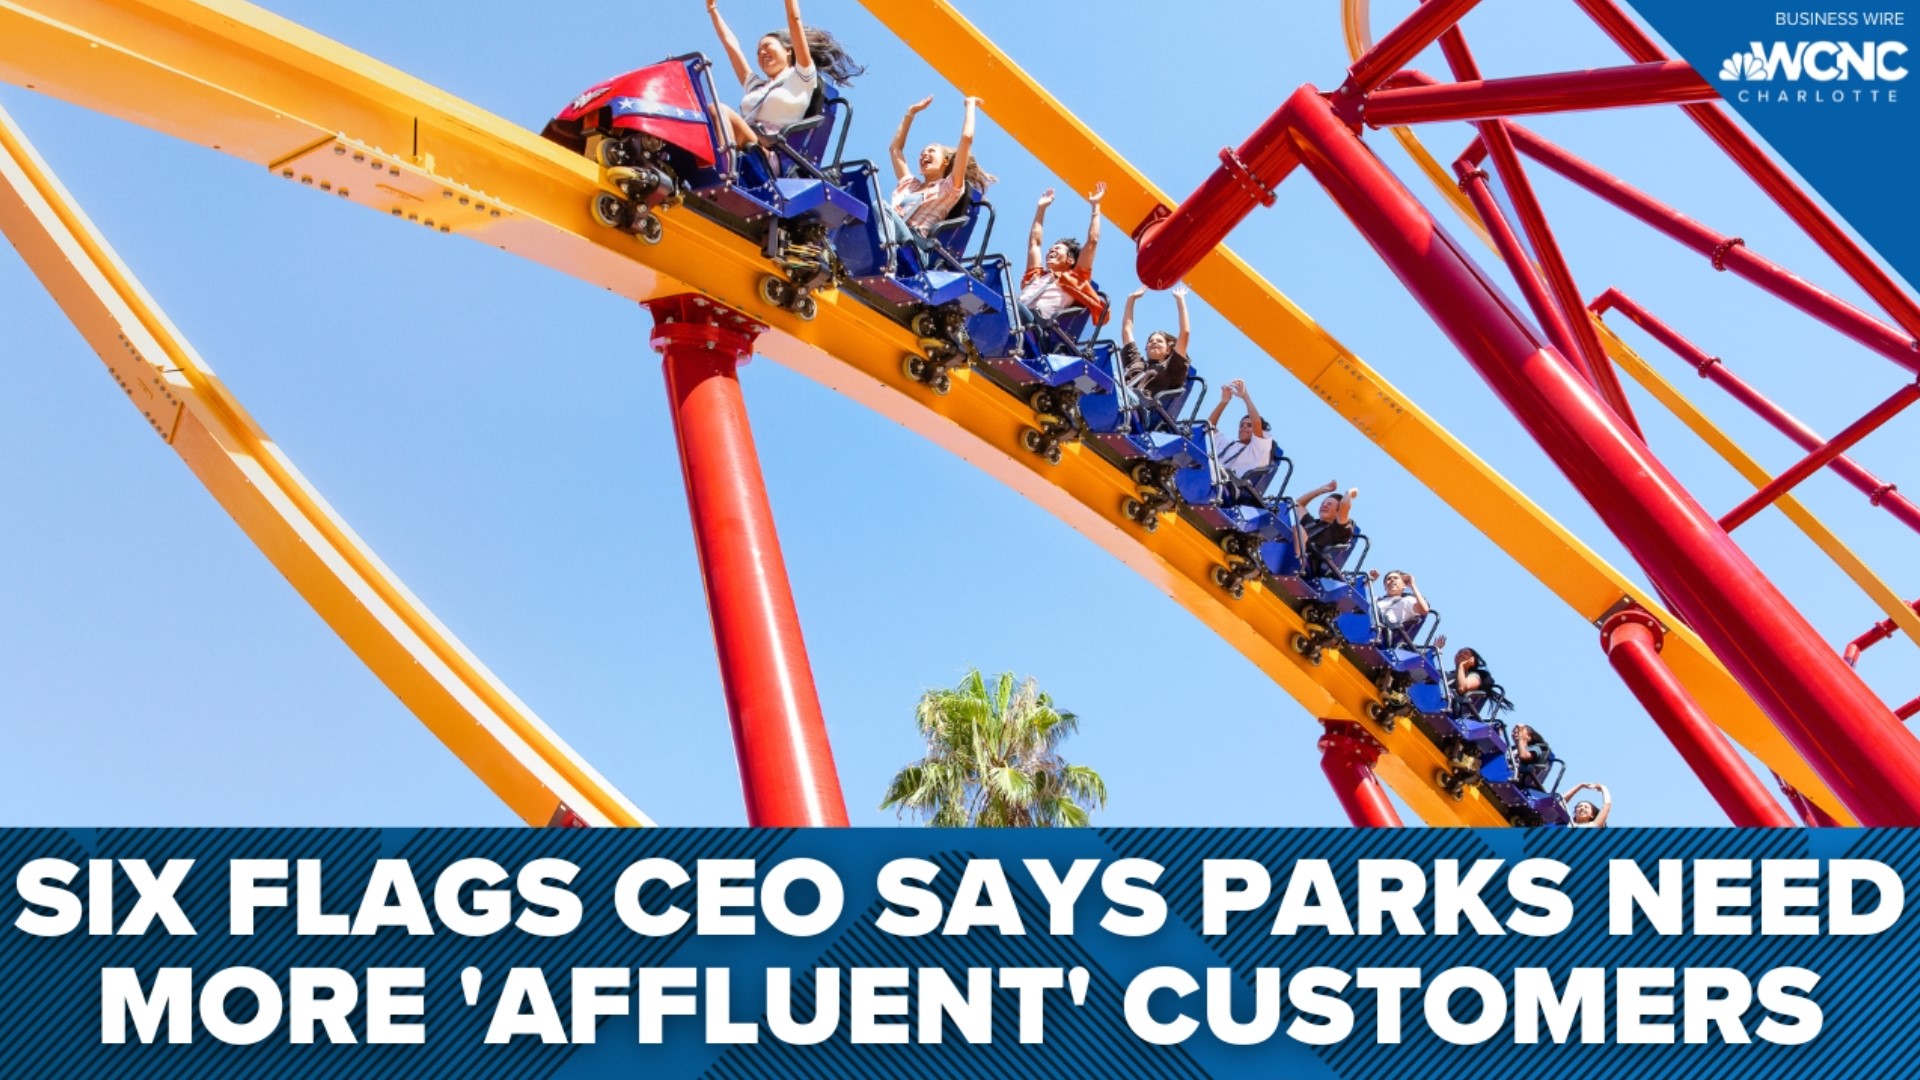 Leaders of the amusement park chain Six Flags say they want to revamp its image.